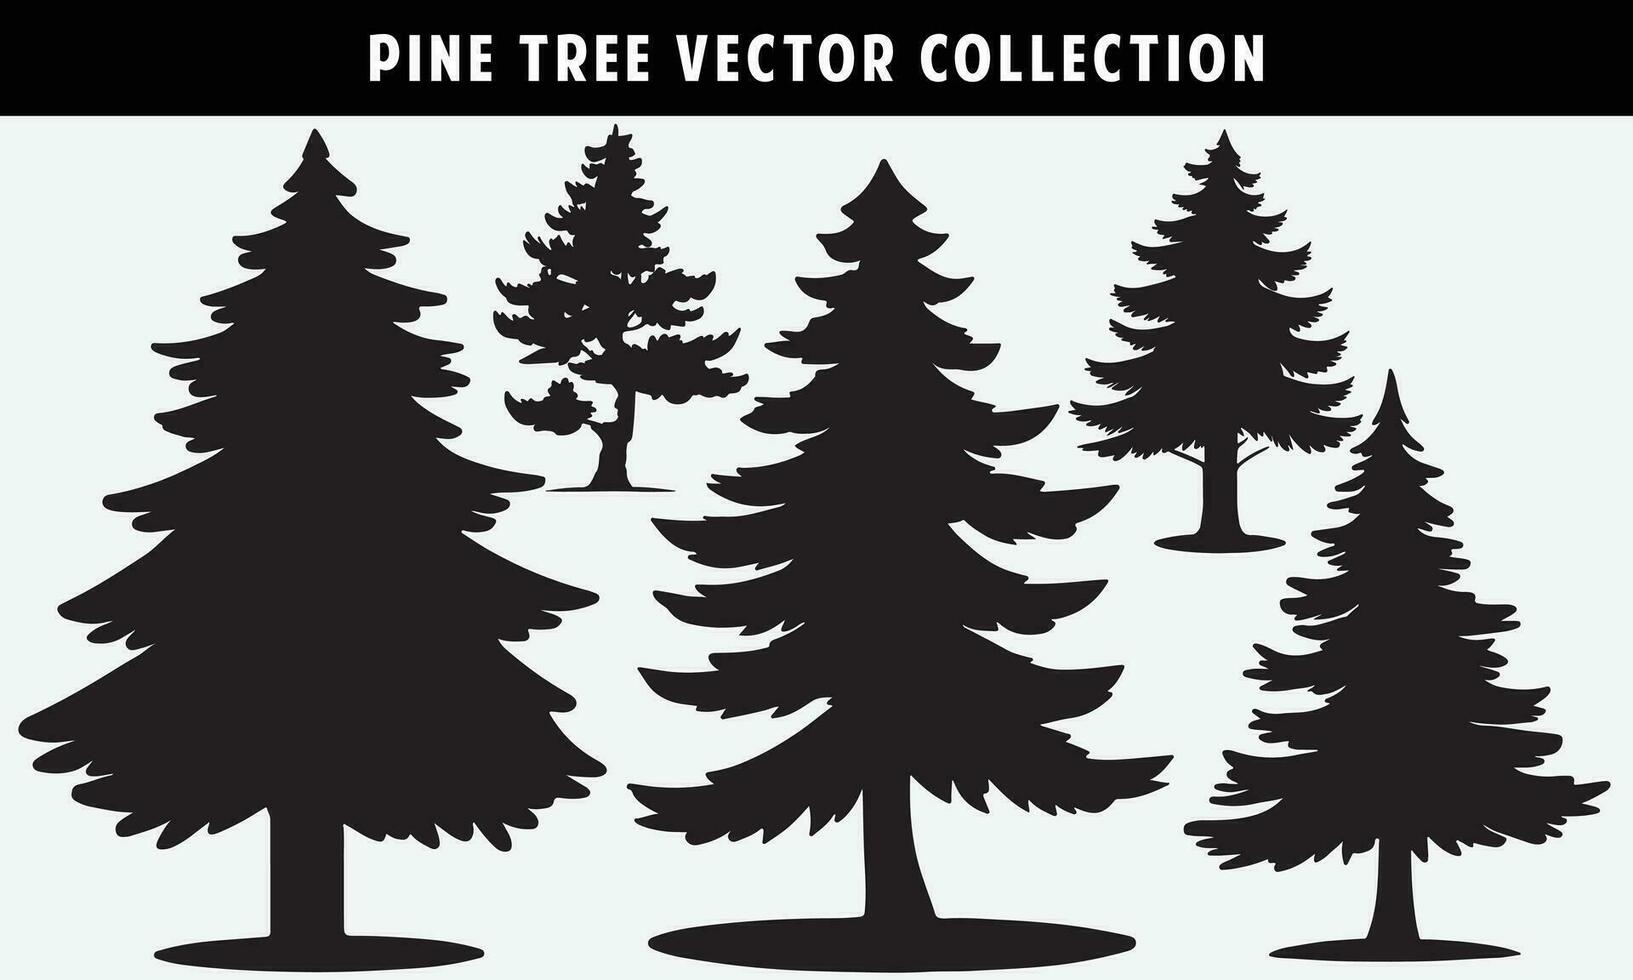 set of pine trees silhouettes vector graphics for design